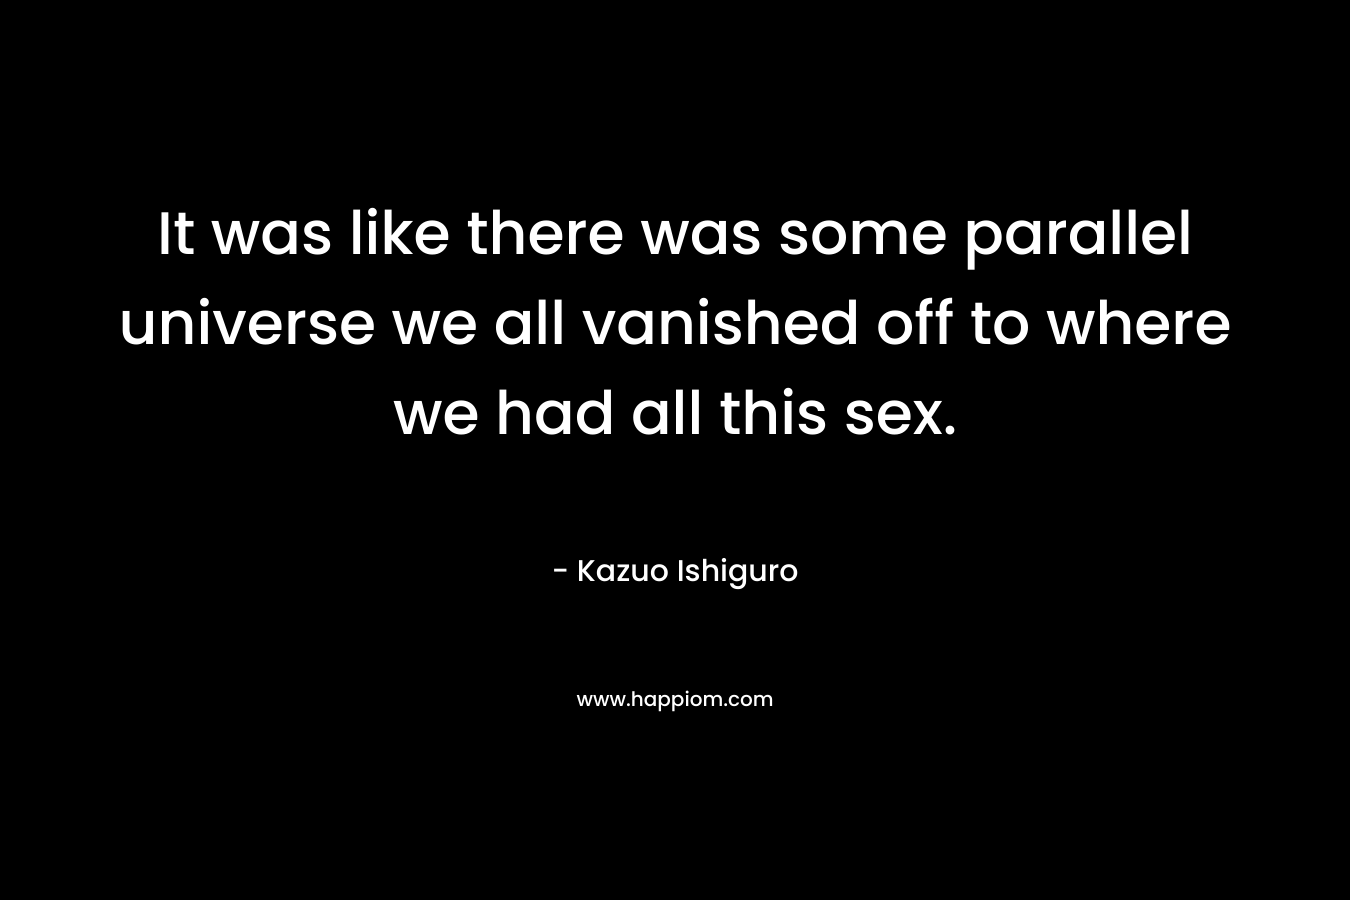 It was like there was some parallel universe we all vanished off to where we had all this sex. – Kazuo Ishiguro